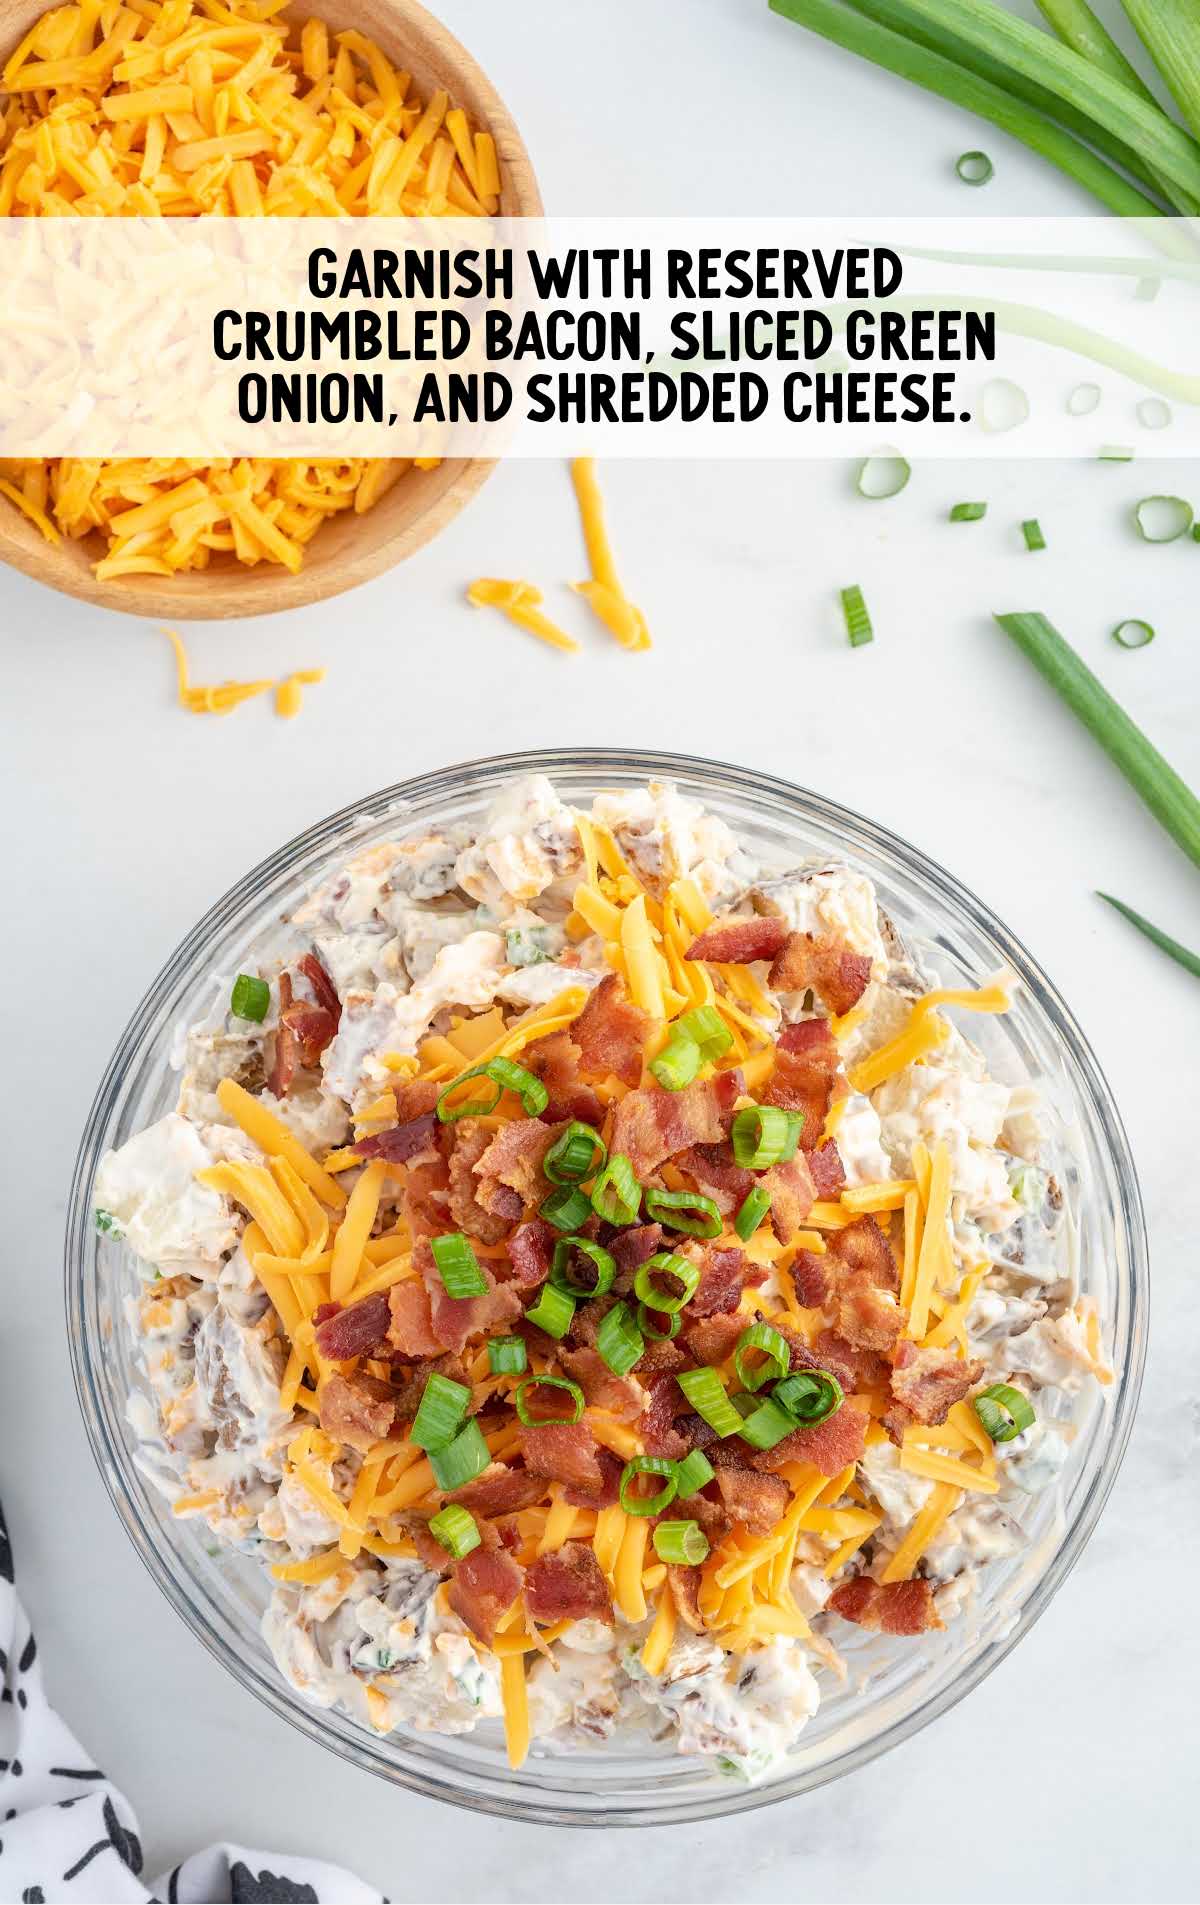 bacon, sliced green onion, and shredded cheese topped on top of the salad in a bowl